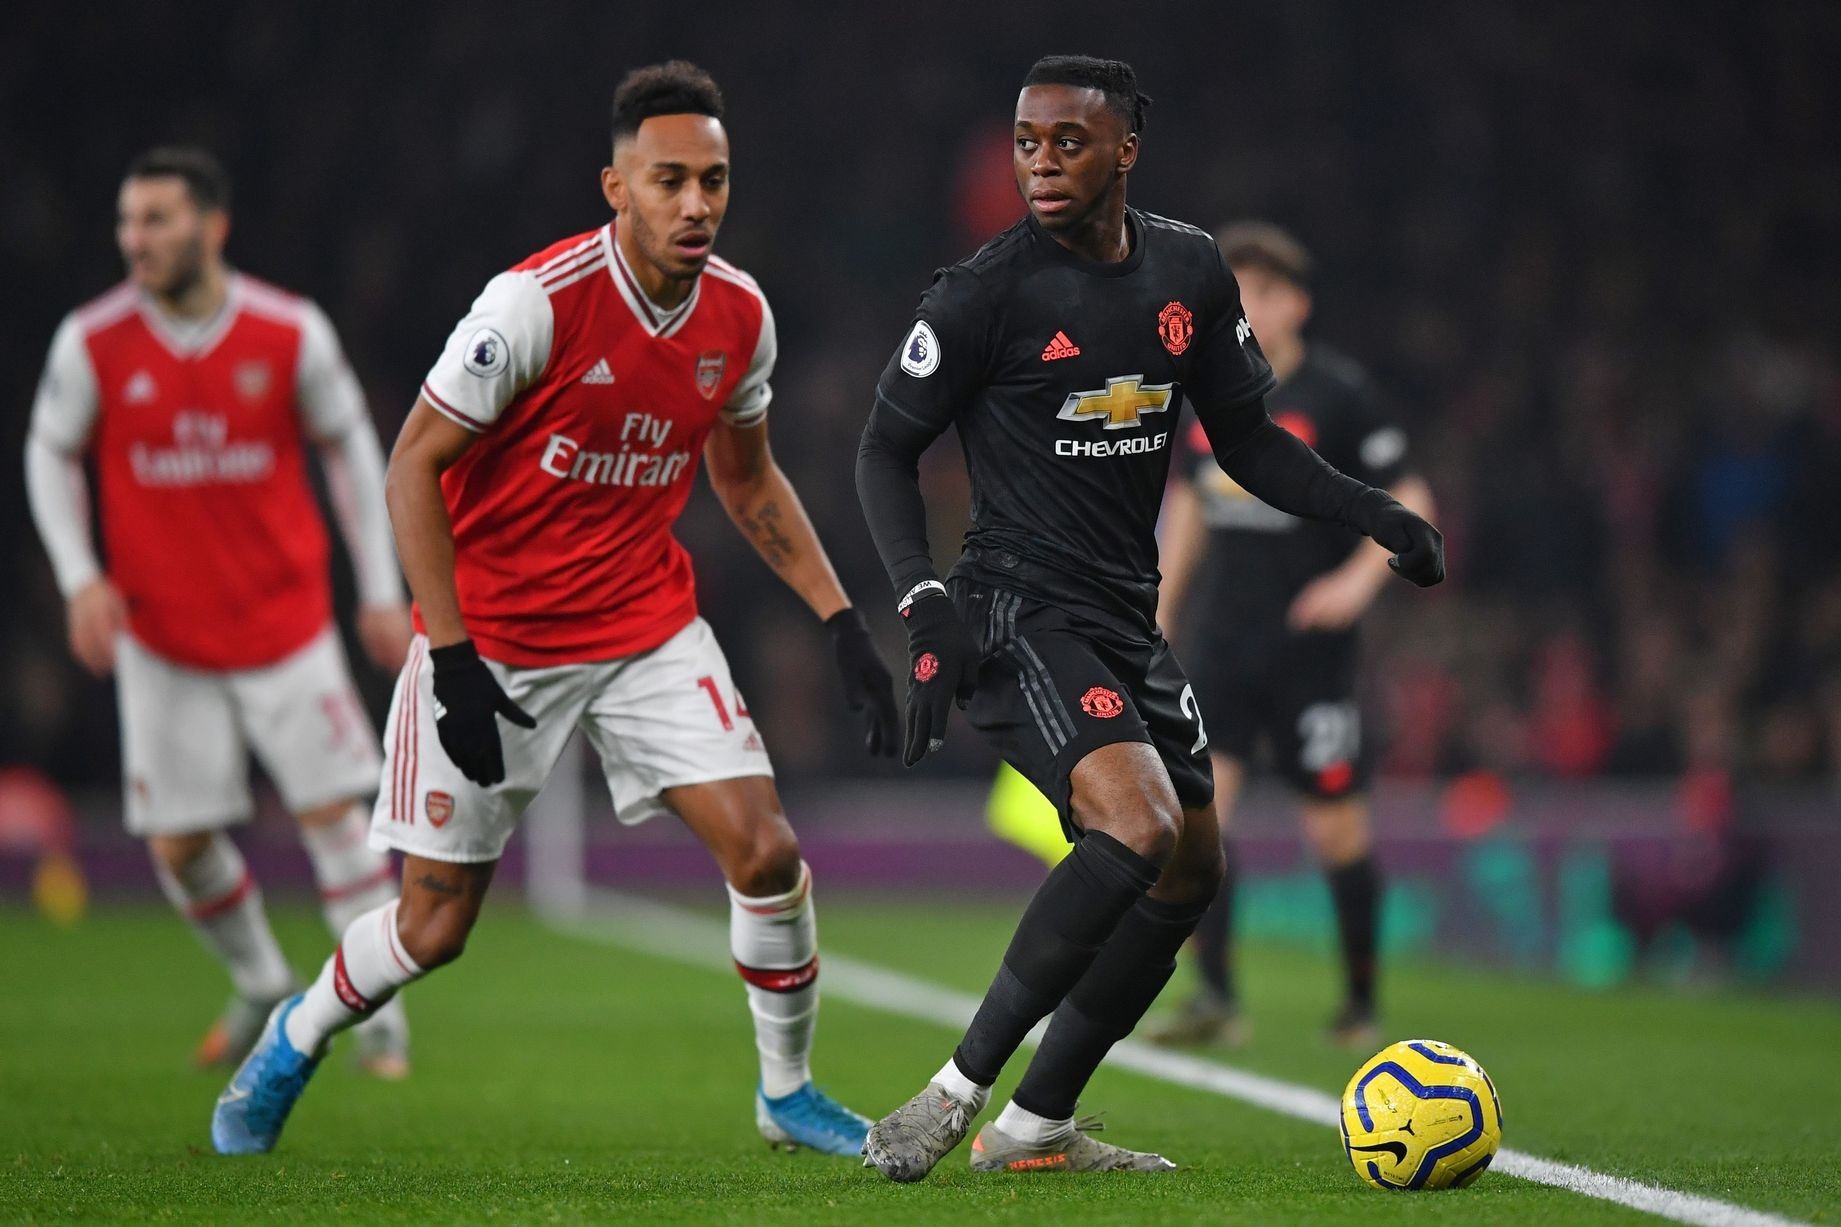 Arsenal vs Manchester United preview, team news, prediction, stats, kick-off time